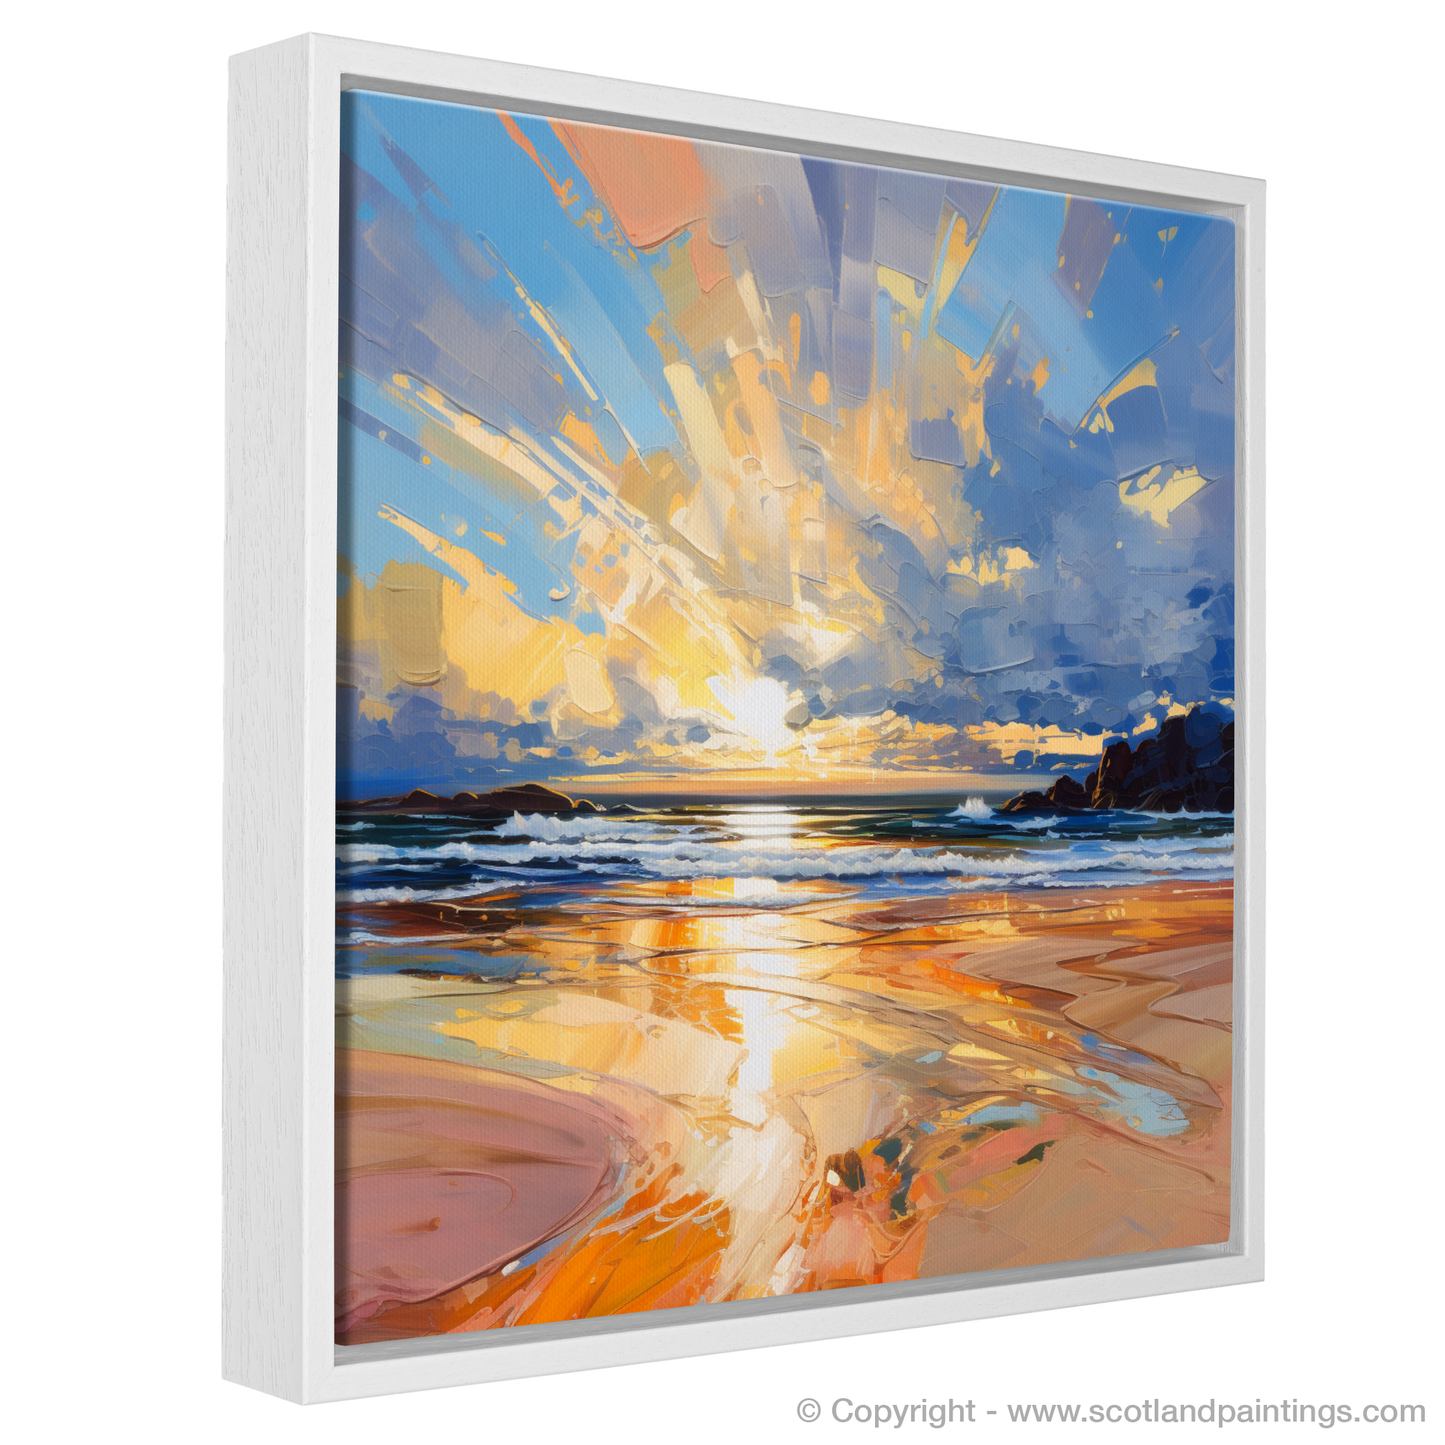 Painting and Art Print of Balmedie Beach at golden hour entitled "Golden Embrace of Balmedie Beach".